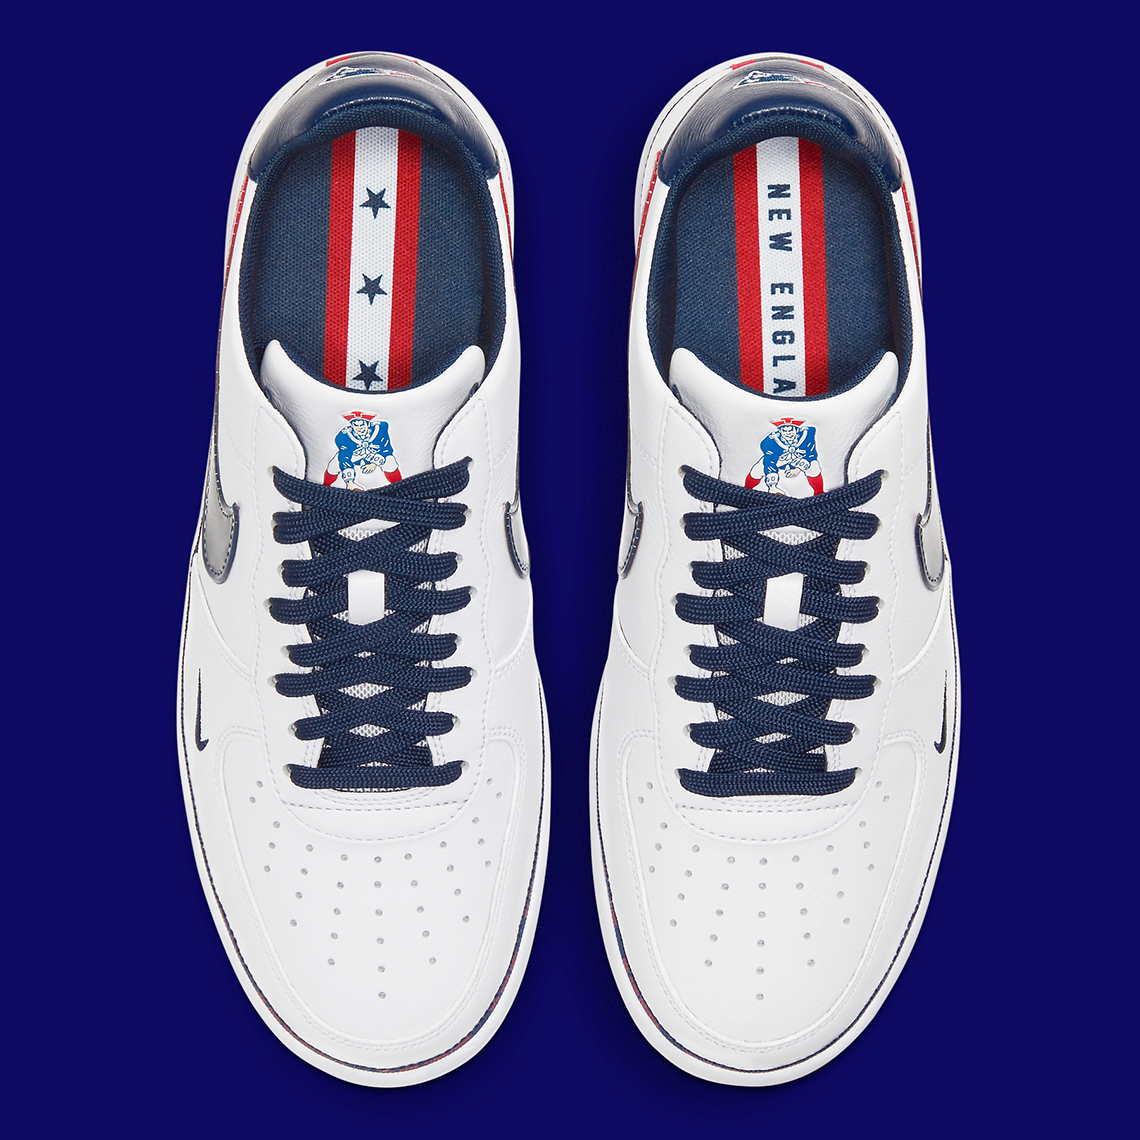 the patriots nike air force 1